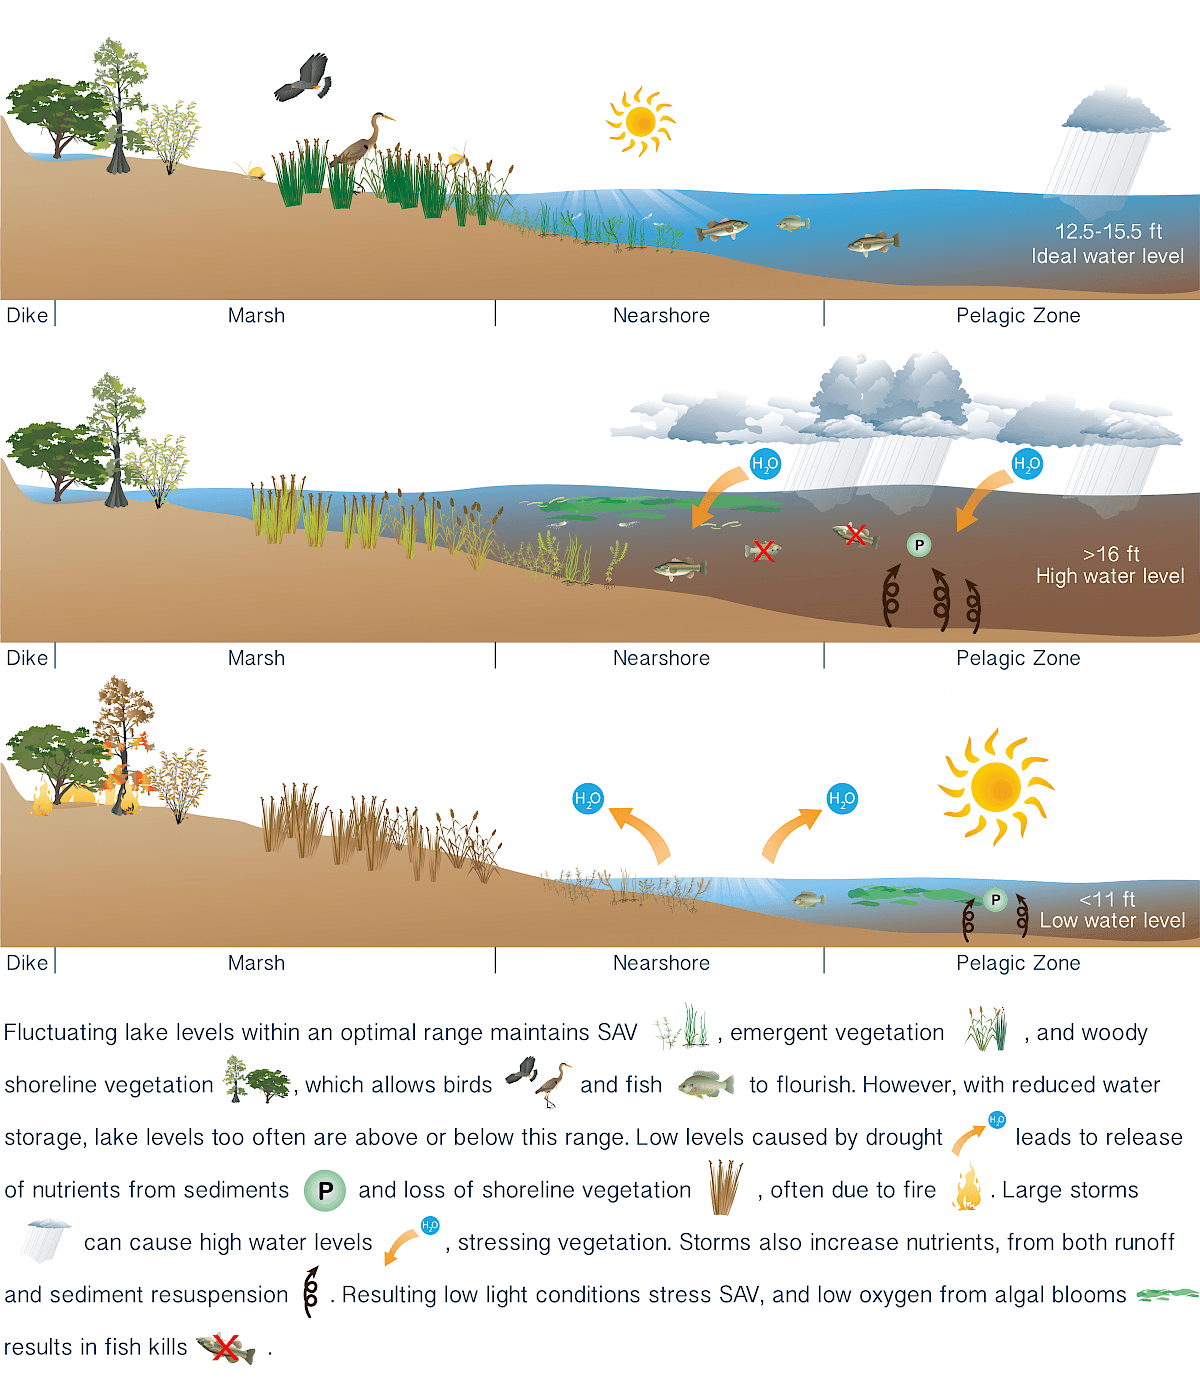 Graphic. Fluctuating lake levels within an optimal range maintains SAV, emergent vegetation, and woody shoreline vegetation, which allows birds and fish to flourish. However, with reduced water storage, lake levels too often are above or below this range. Low levels caused by drought lead to release of nutrients from sediments and loss of shoreline vegetation, often do to fire. Large storms can cause high water levels, stressing vegetation. Storms also increase nutrients from both runoff and sediment resuspension. Resulting low light conditions stress SAV, and low oxygen from algai blooms result in fish kills.